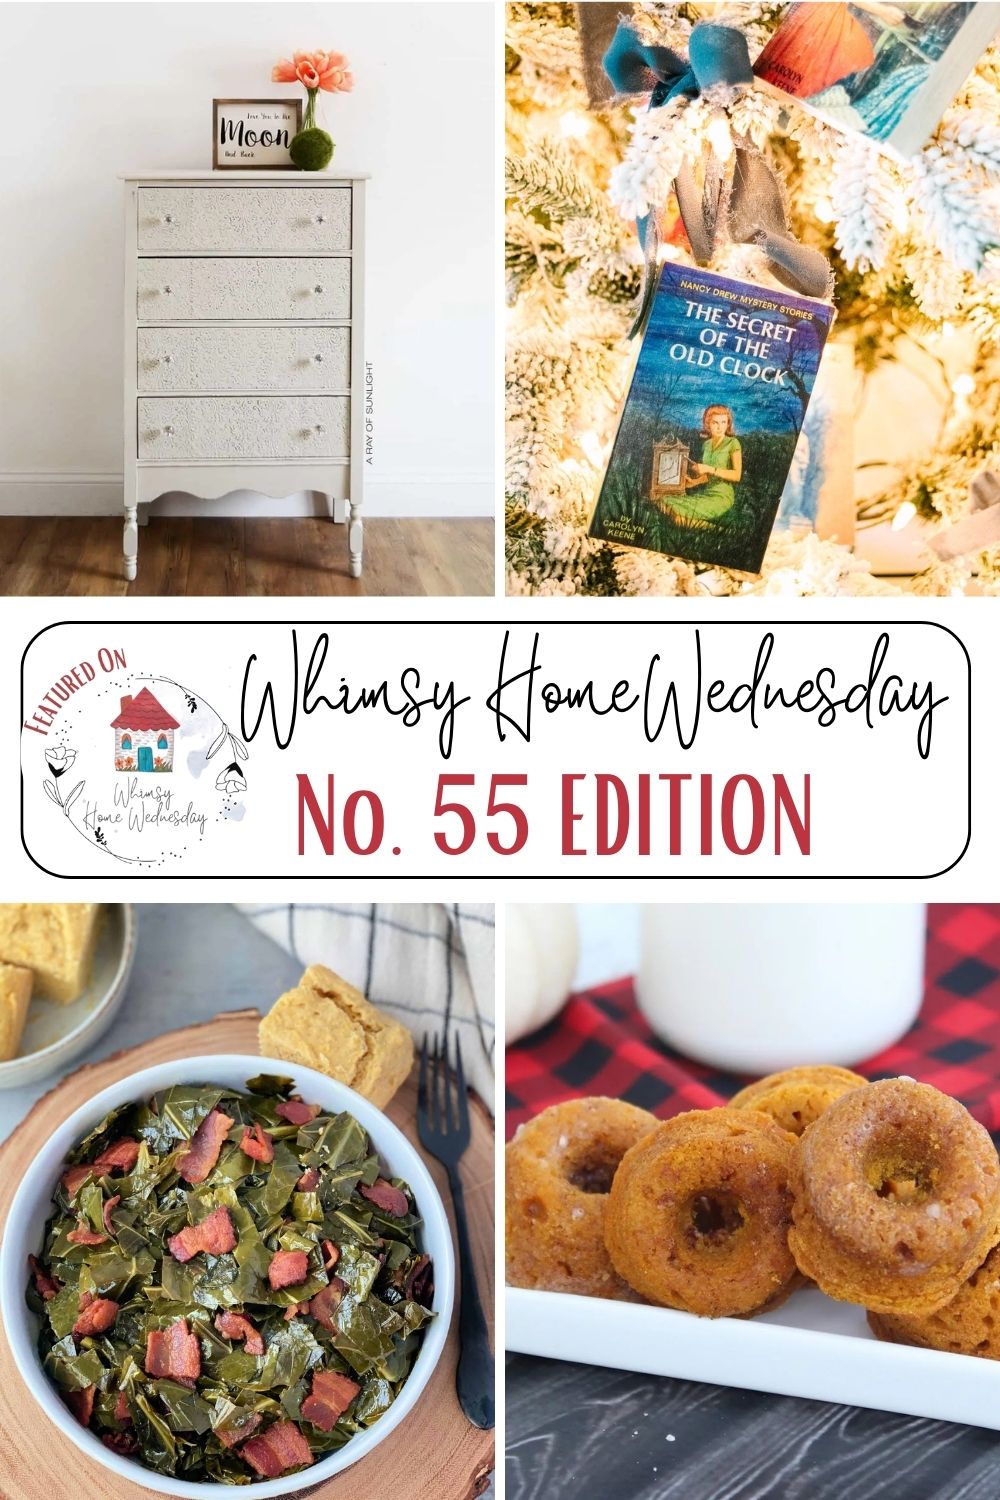 Join us on Whimsy Home Wednesday Blog Link Party No. 55 and see host projects, the features from the previous week and link up your posts!